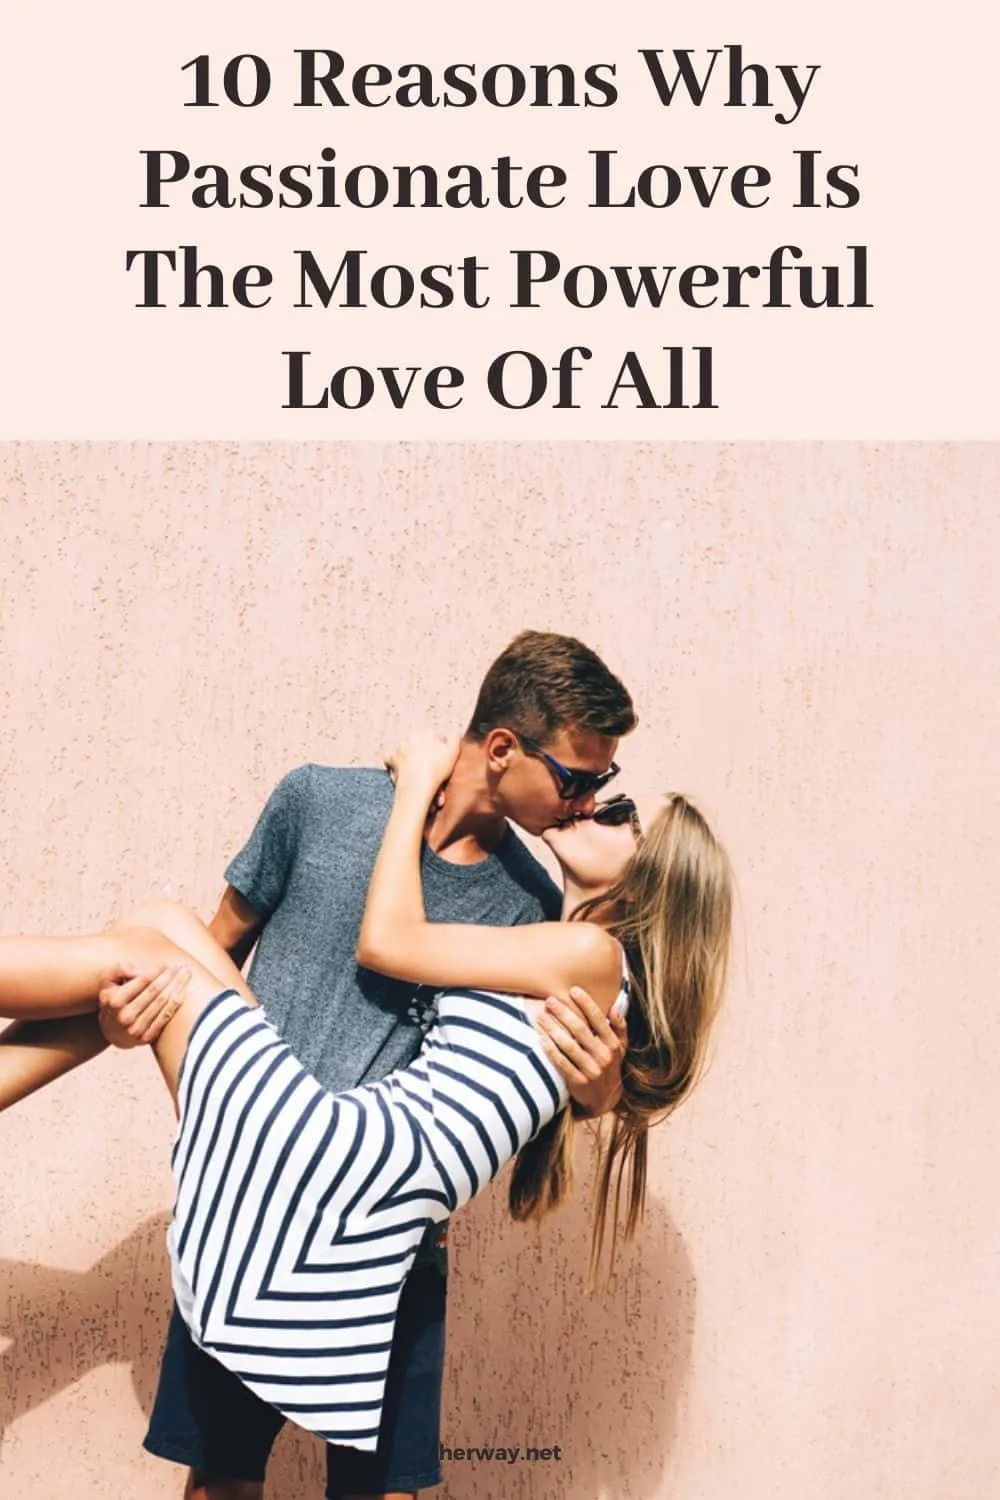 10 Reasons Why Passionate Love Is The Most Powerful Love Of All